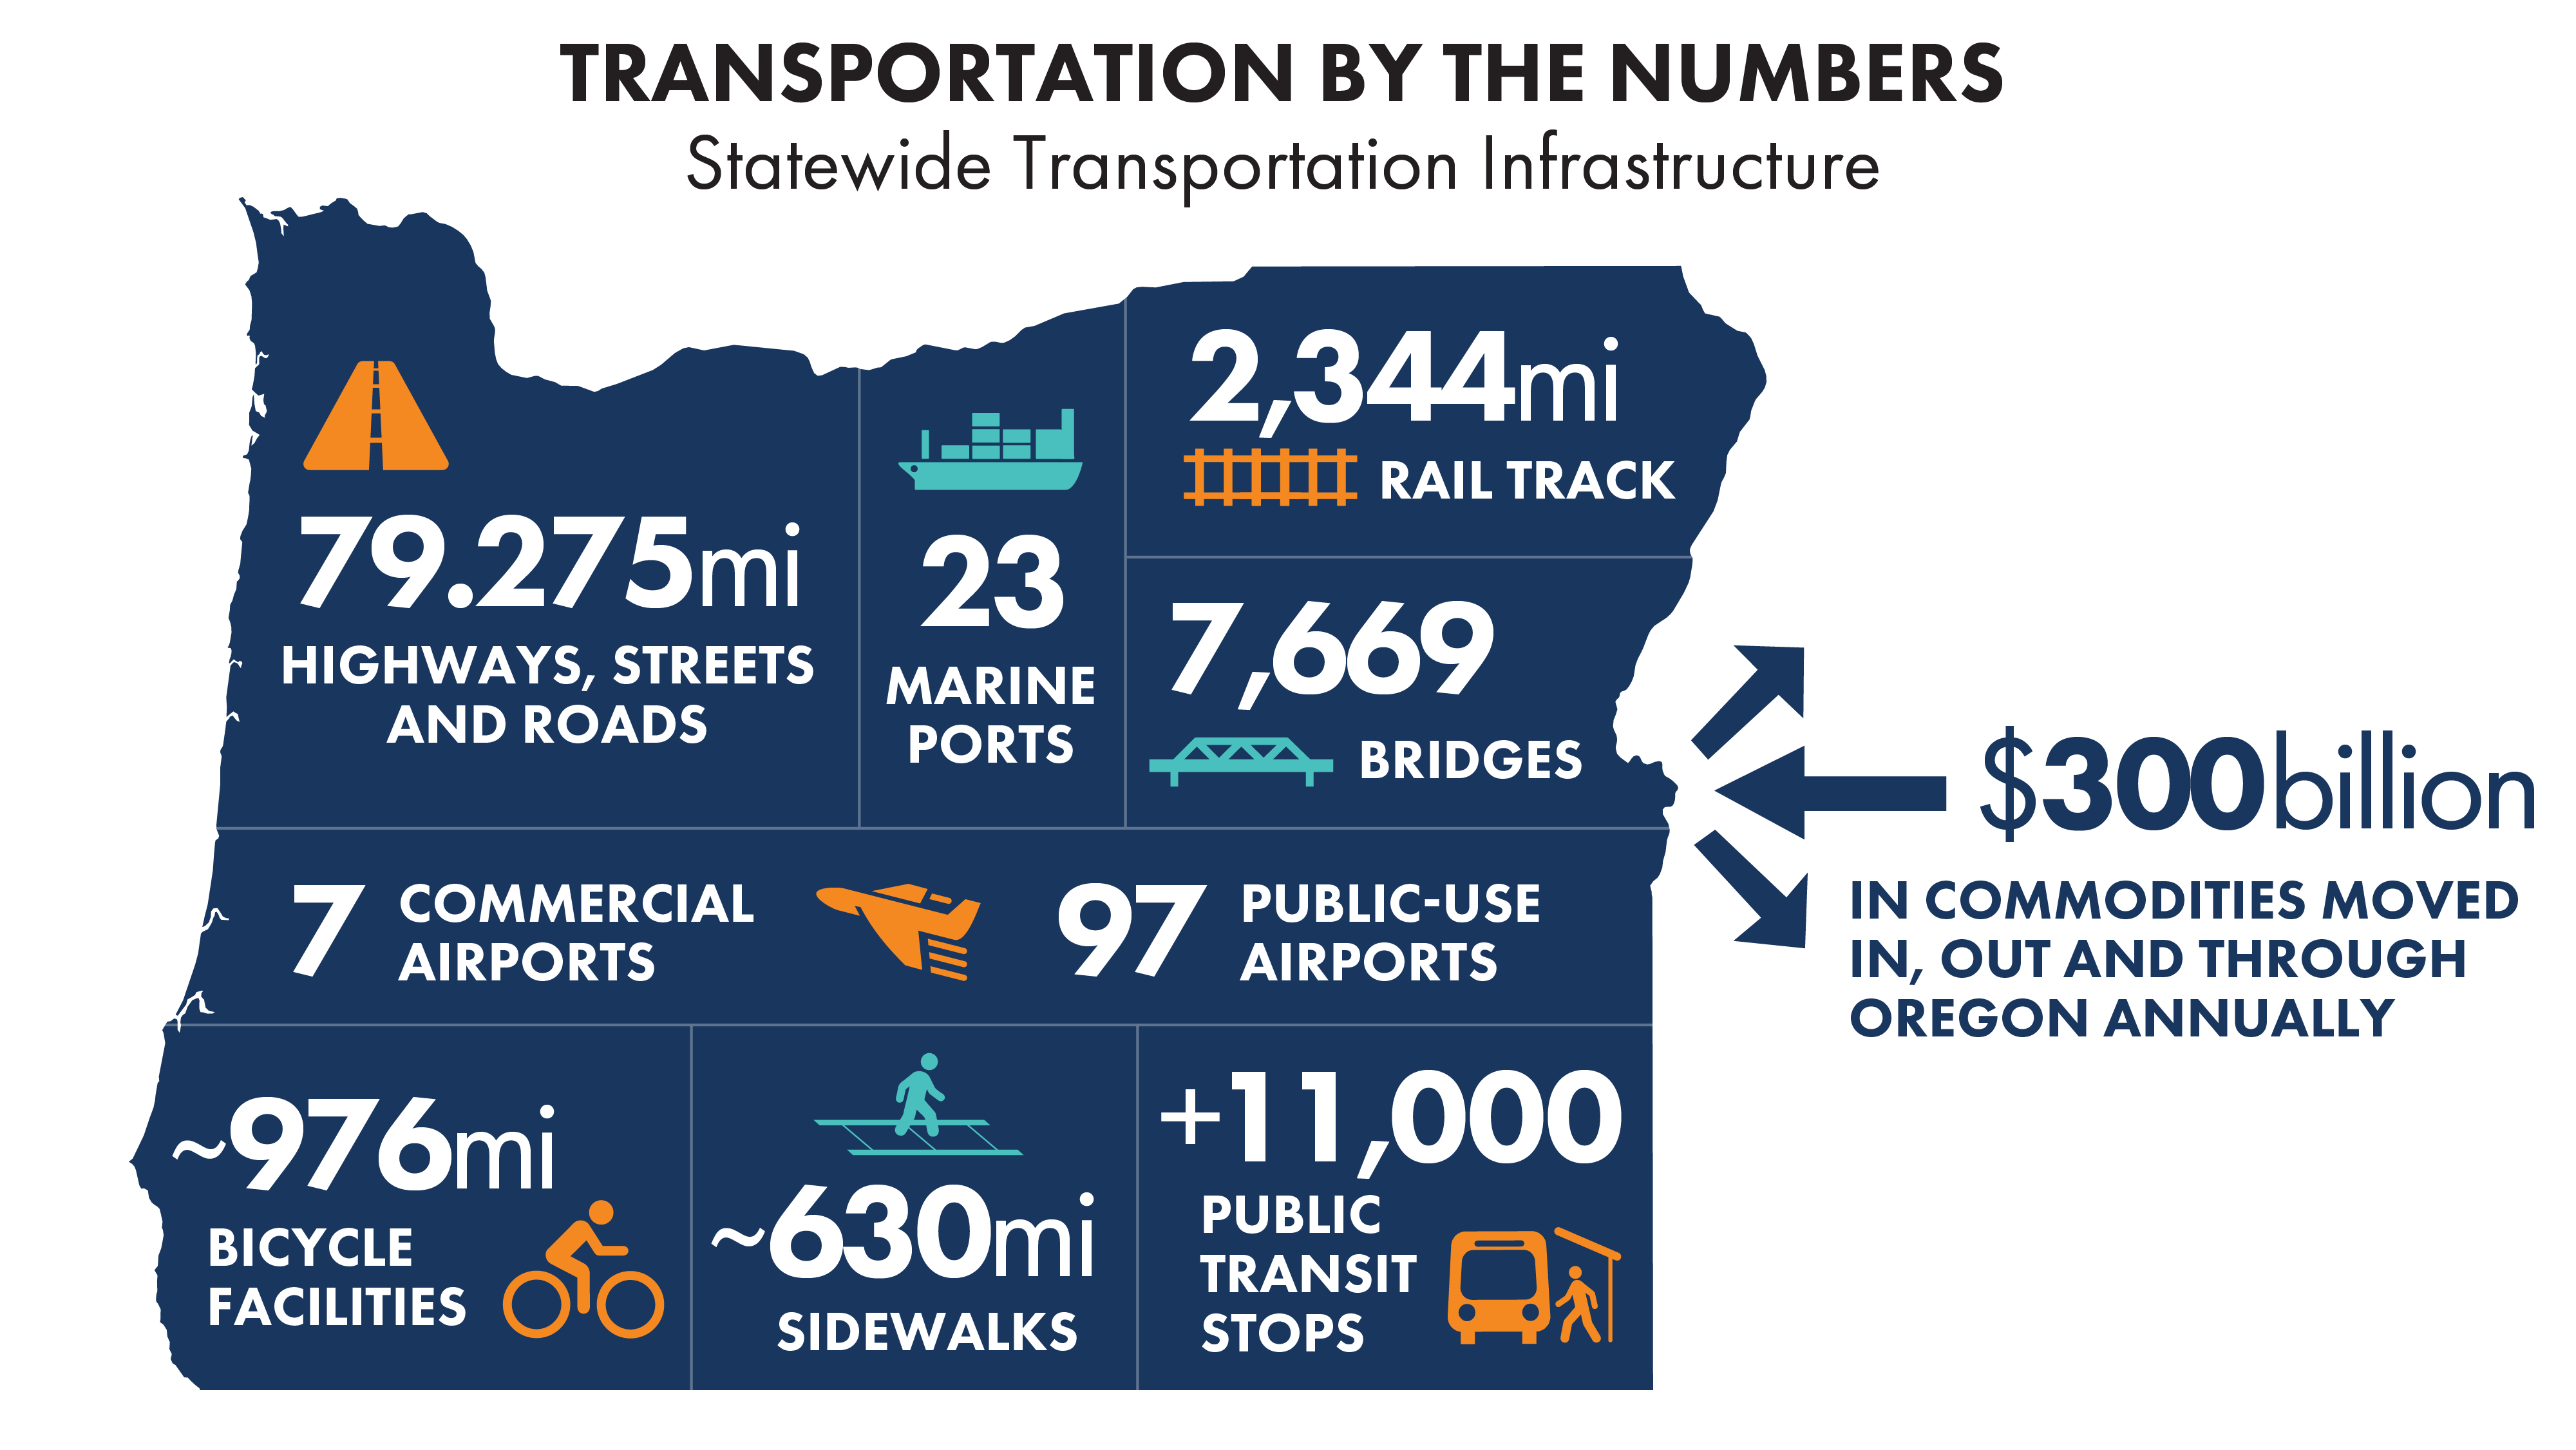 Transportation by the numbers for highways, streets and roads; airports; marine ports; rail tracks; bridges; bicycle facilities; sidewalk miles and public transit stops. 